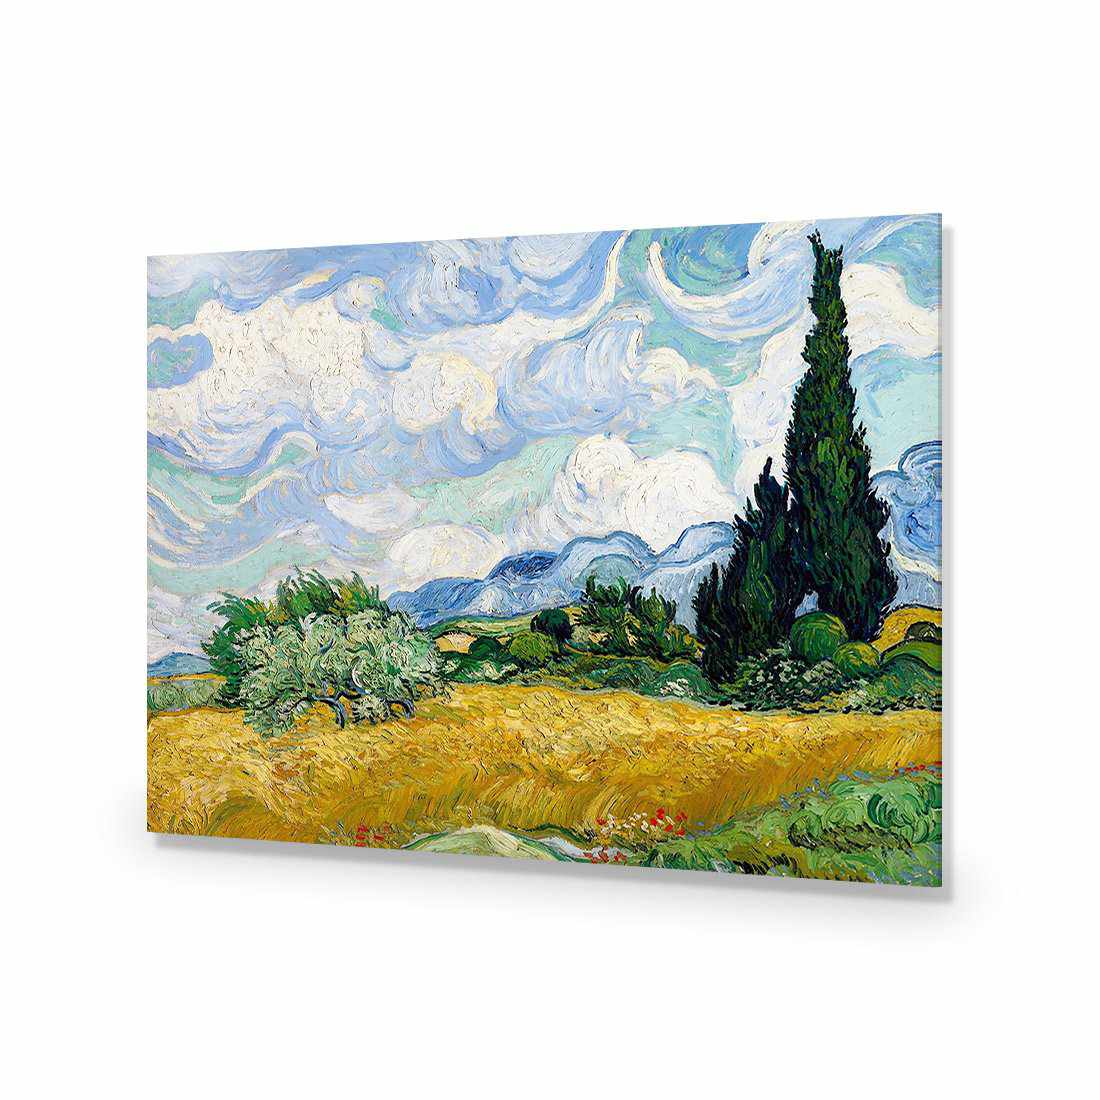 Wheat Field With Cypresses - Van Gogh-Acrylic-Wall Art Design-Without Border-Acrylic - No Frame-45x30cm-Wall Art Designs